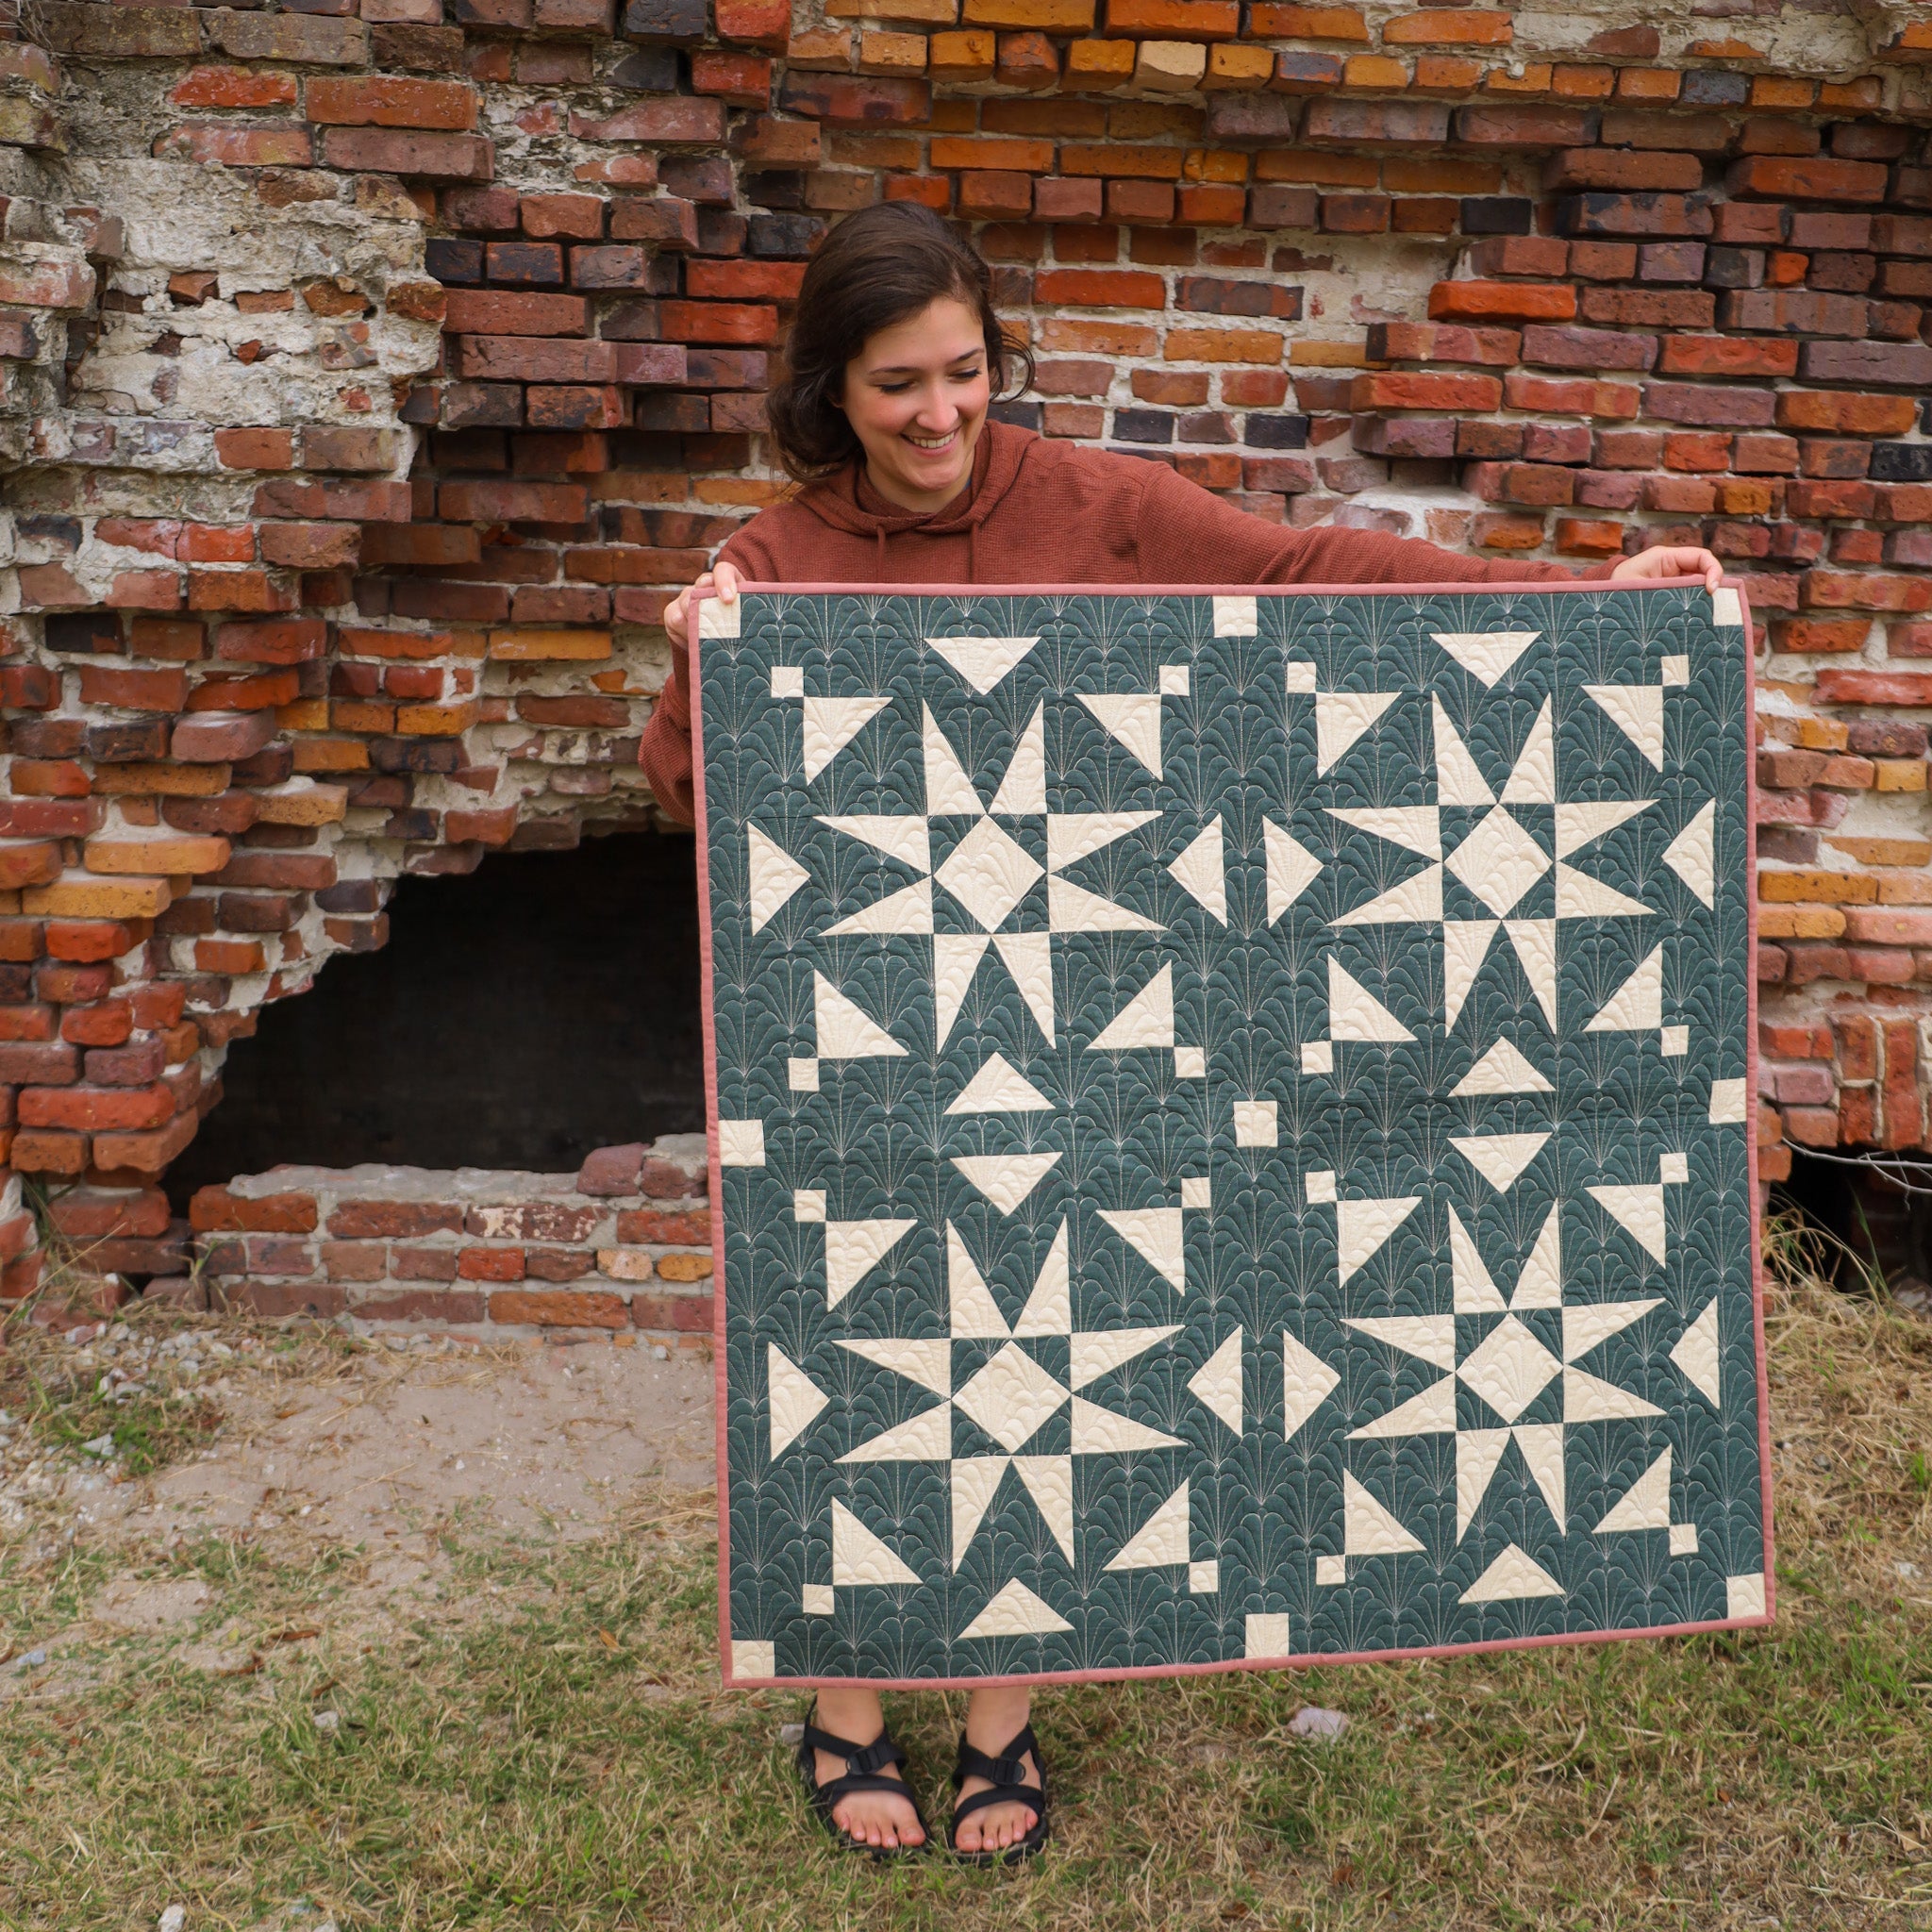 Mosaic Star Quilt - the Woven version